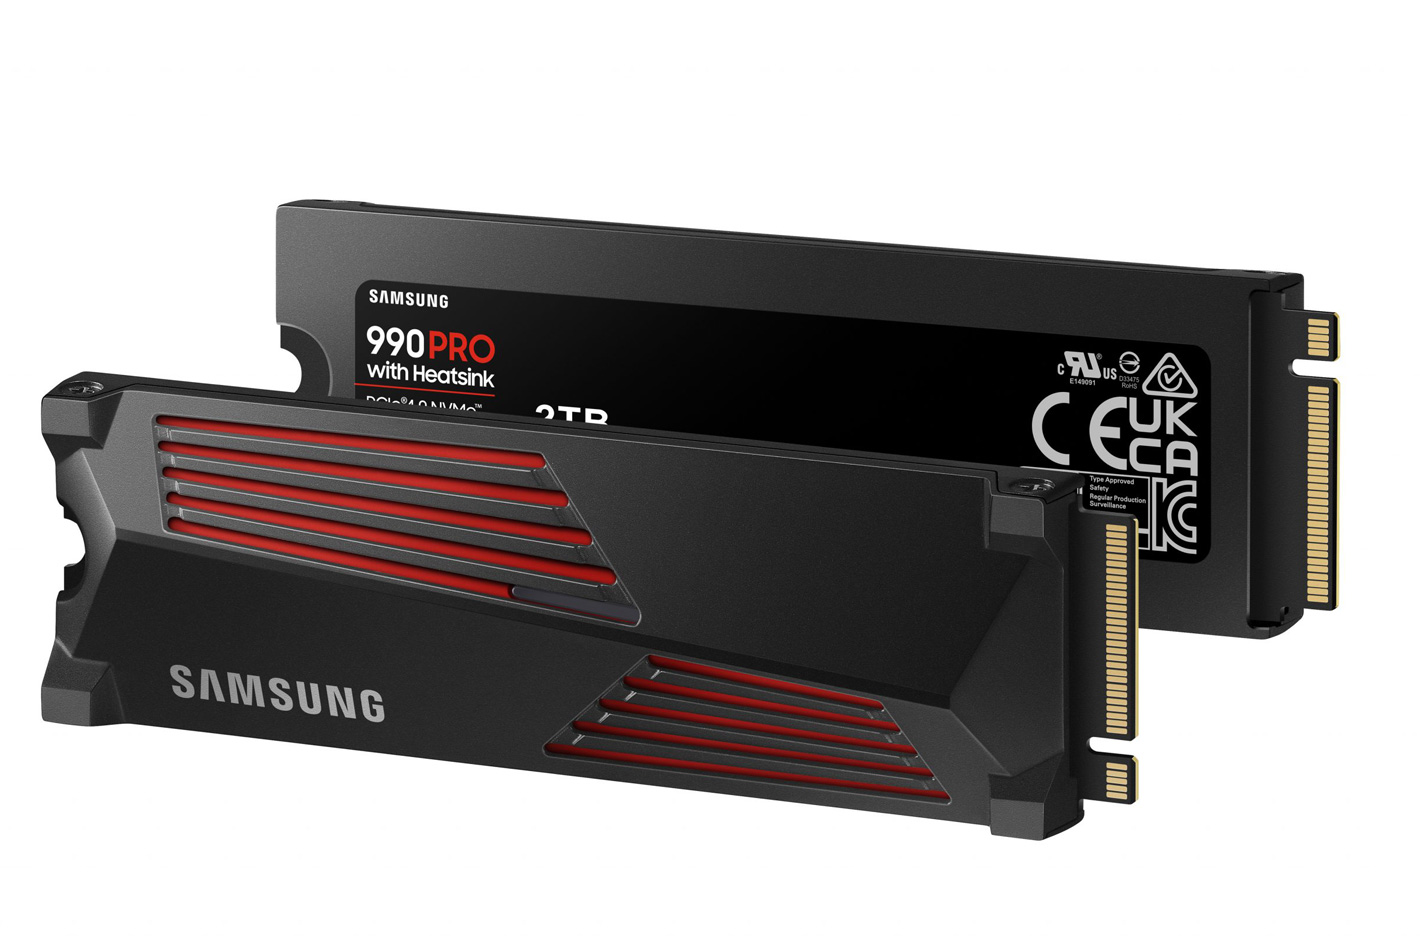 Samsung unveils 990 PRO Series SSDs for creative applications